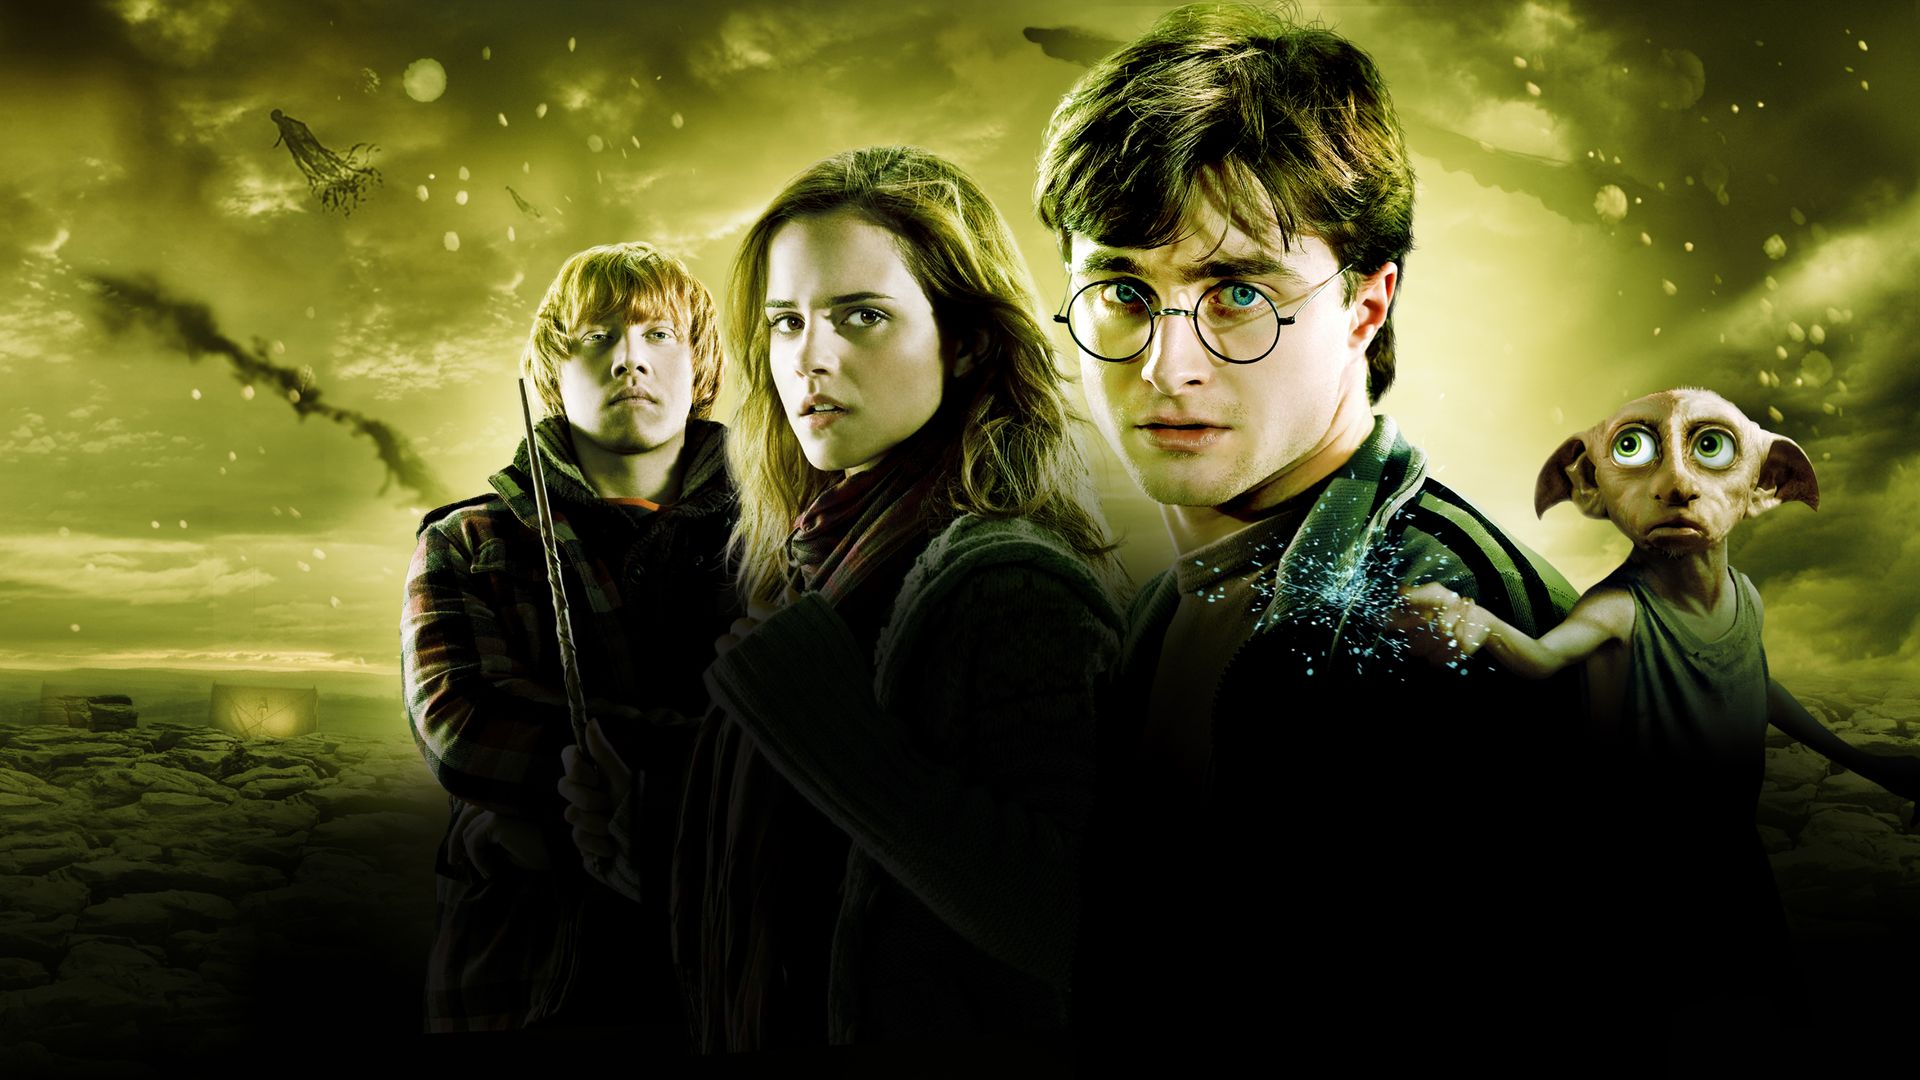 Harry Potter is reportedly being made into HBO series